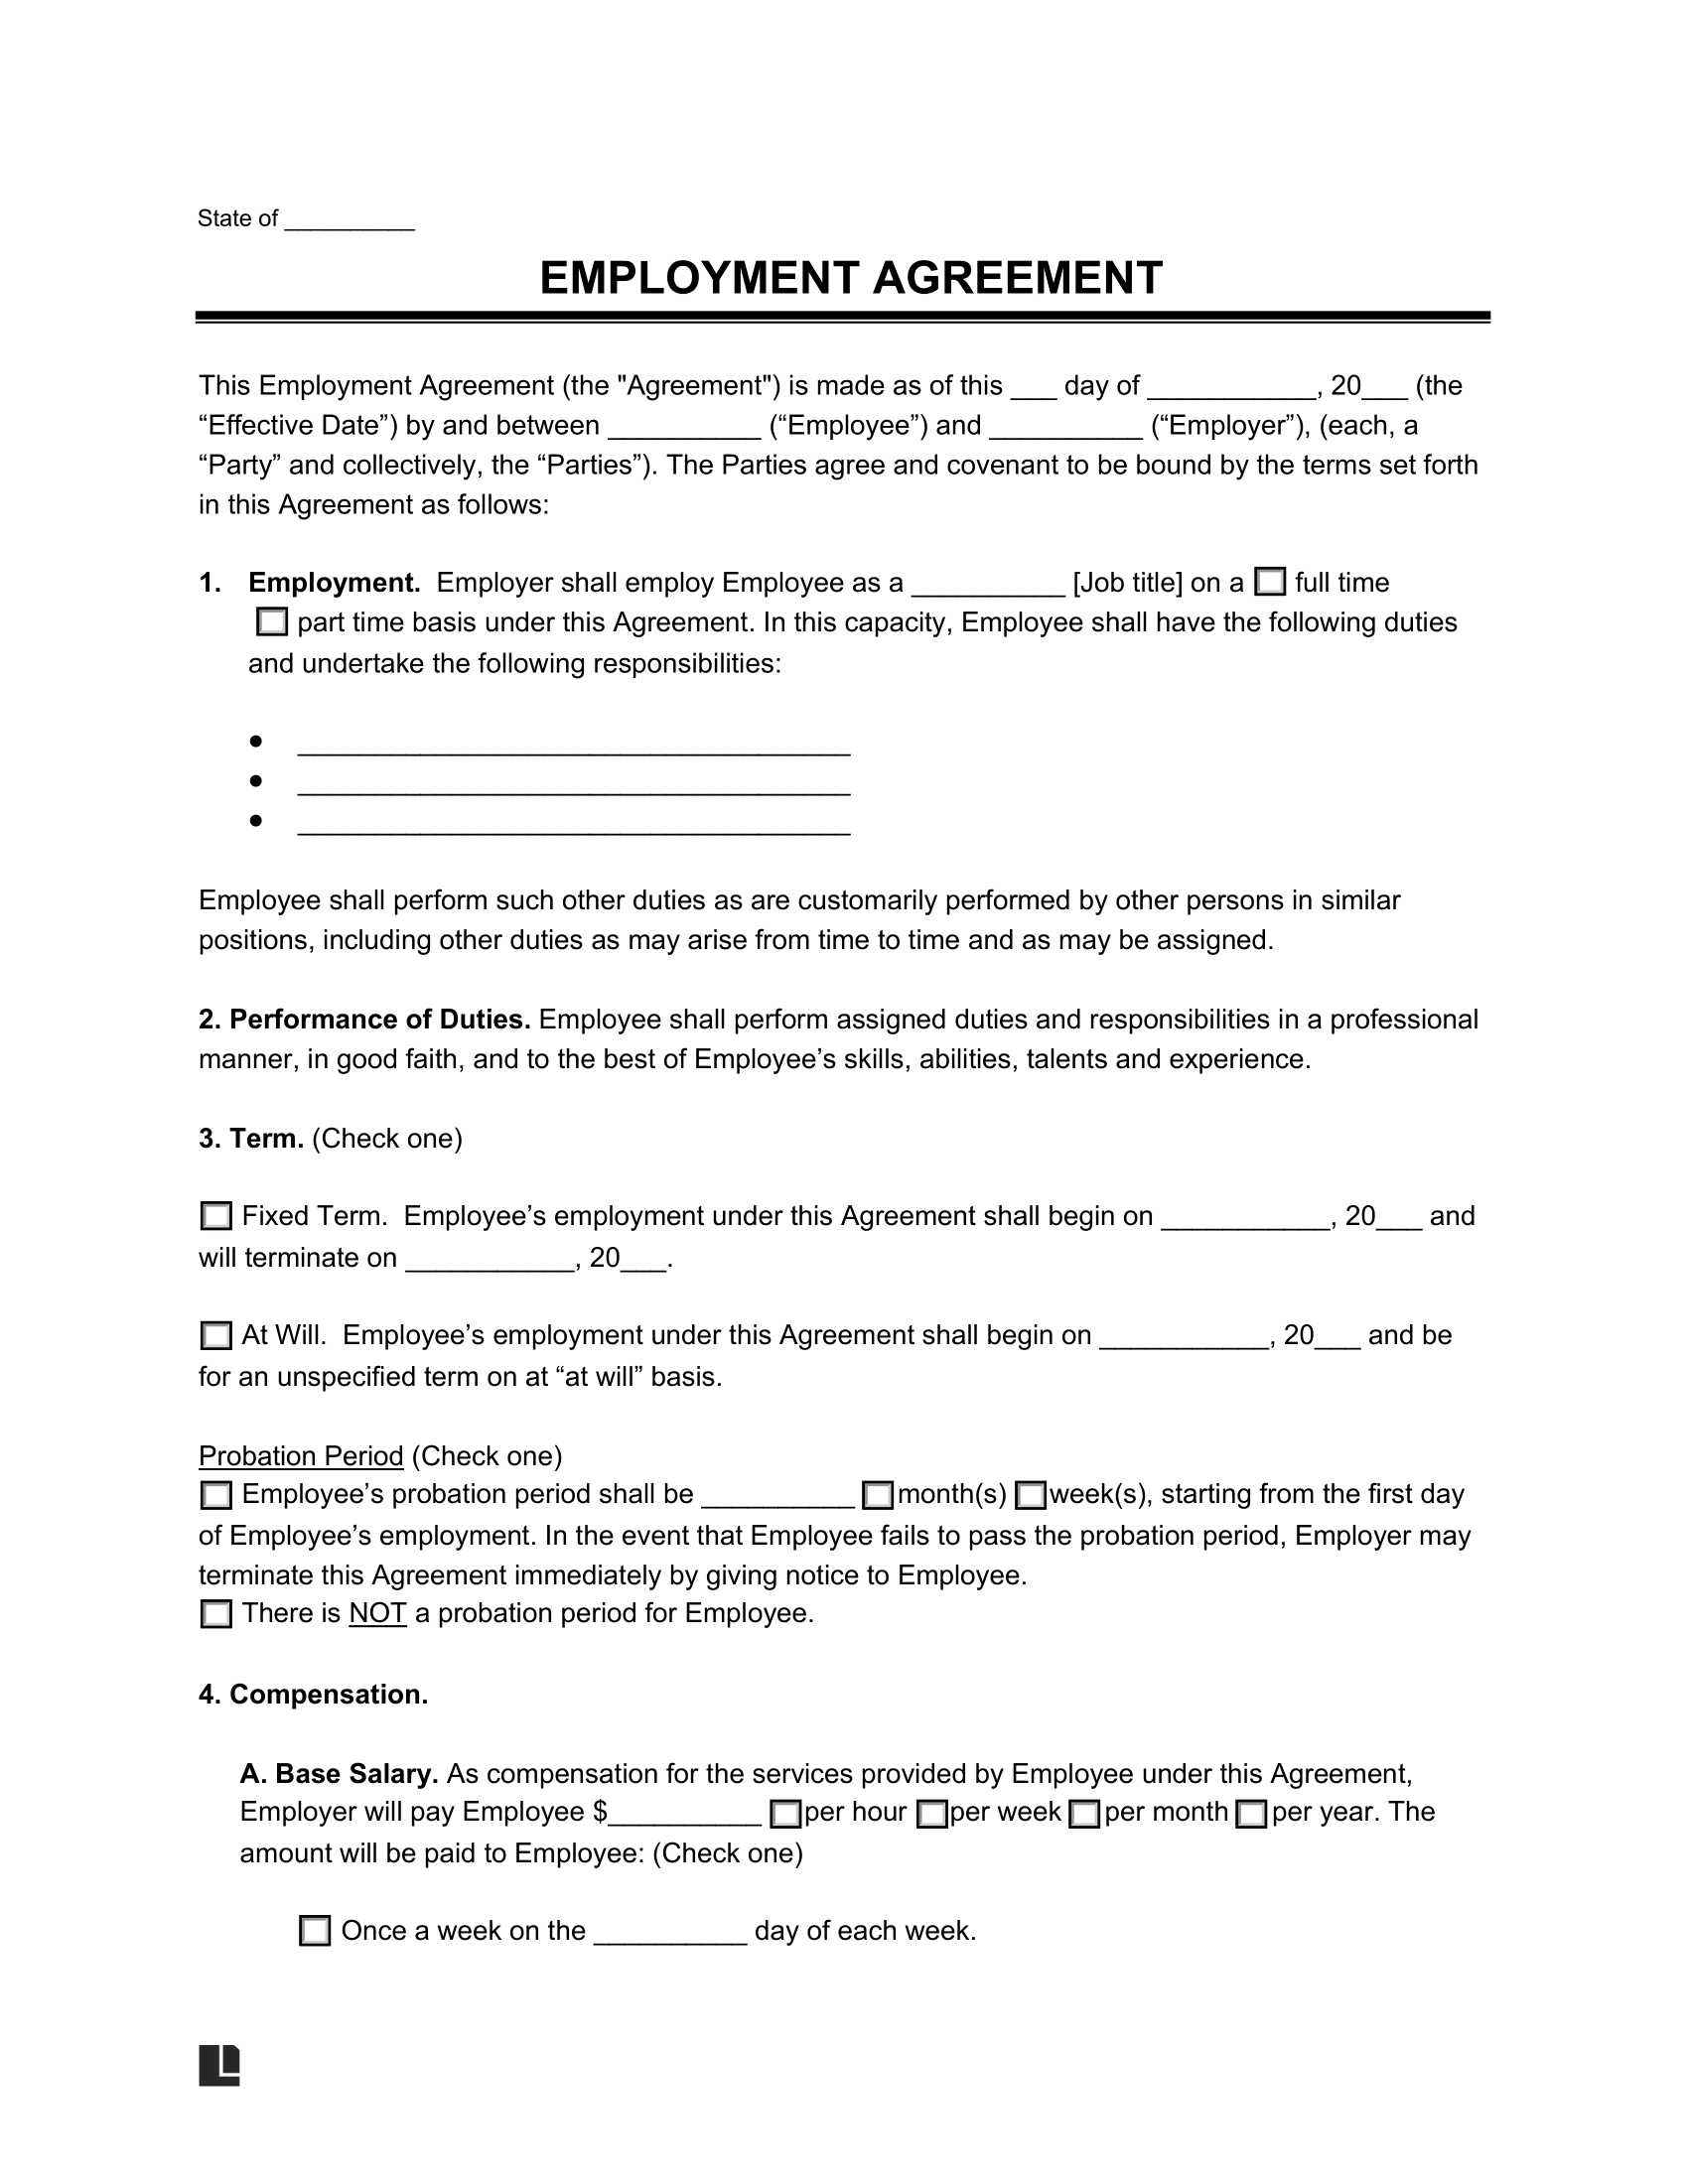 Solved Pre-Employment Reference Check Form These are the